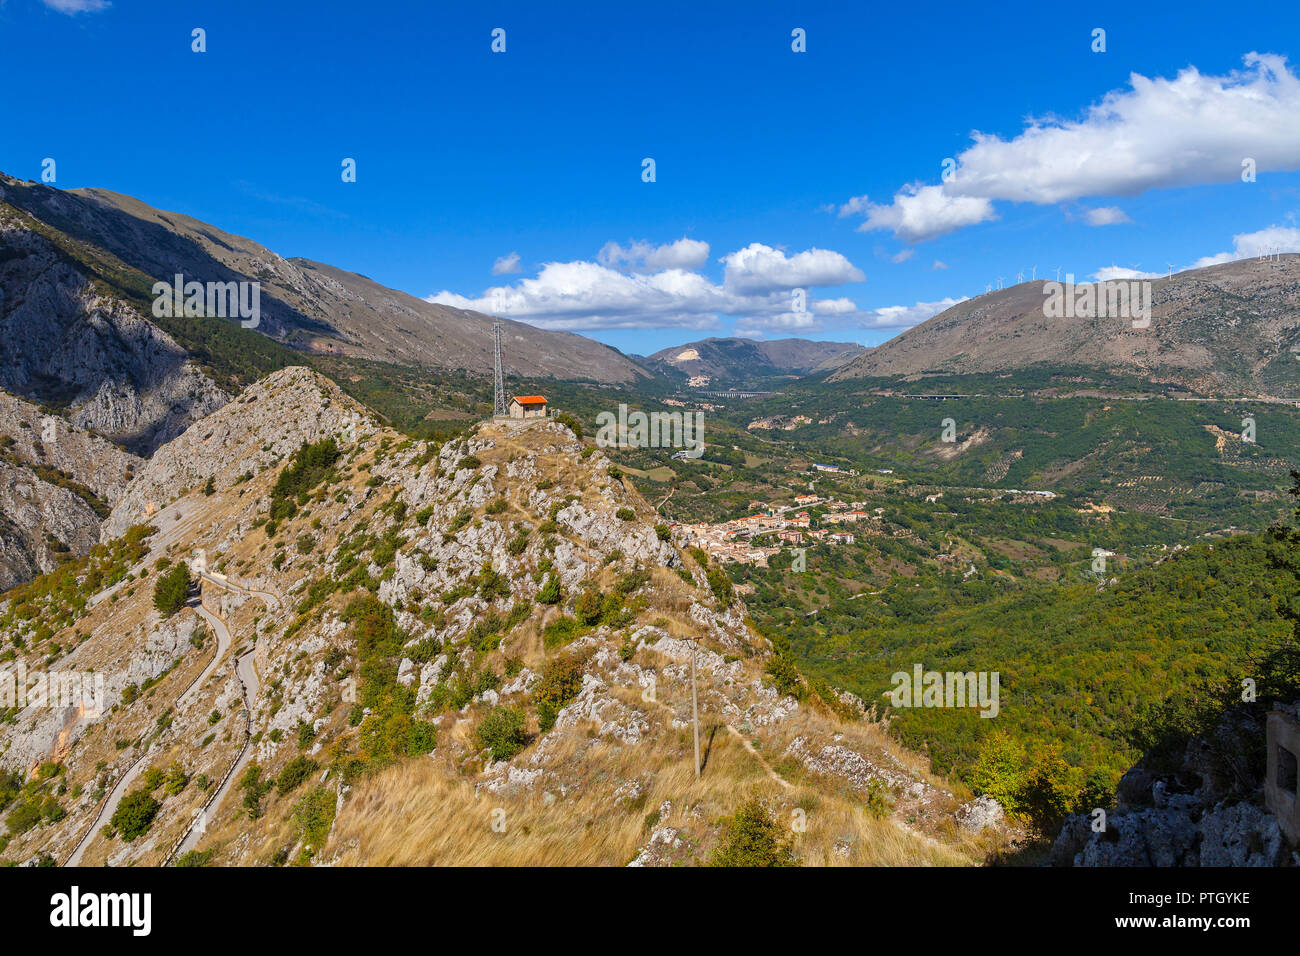 Aerial on a rocky outcrop at Castrovalva,  in the Province of L'Aquila, Abruzzo region, Italy, overlooking Natural Reserve of the Gorges of Sagittario Stock Photo